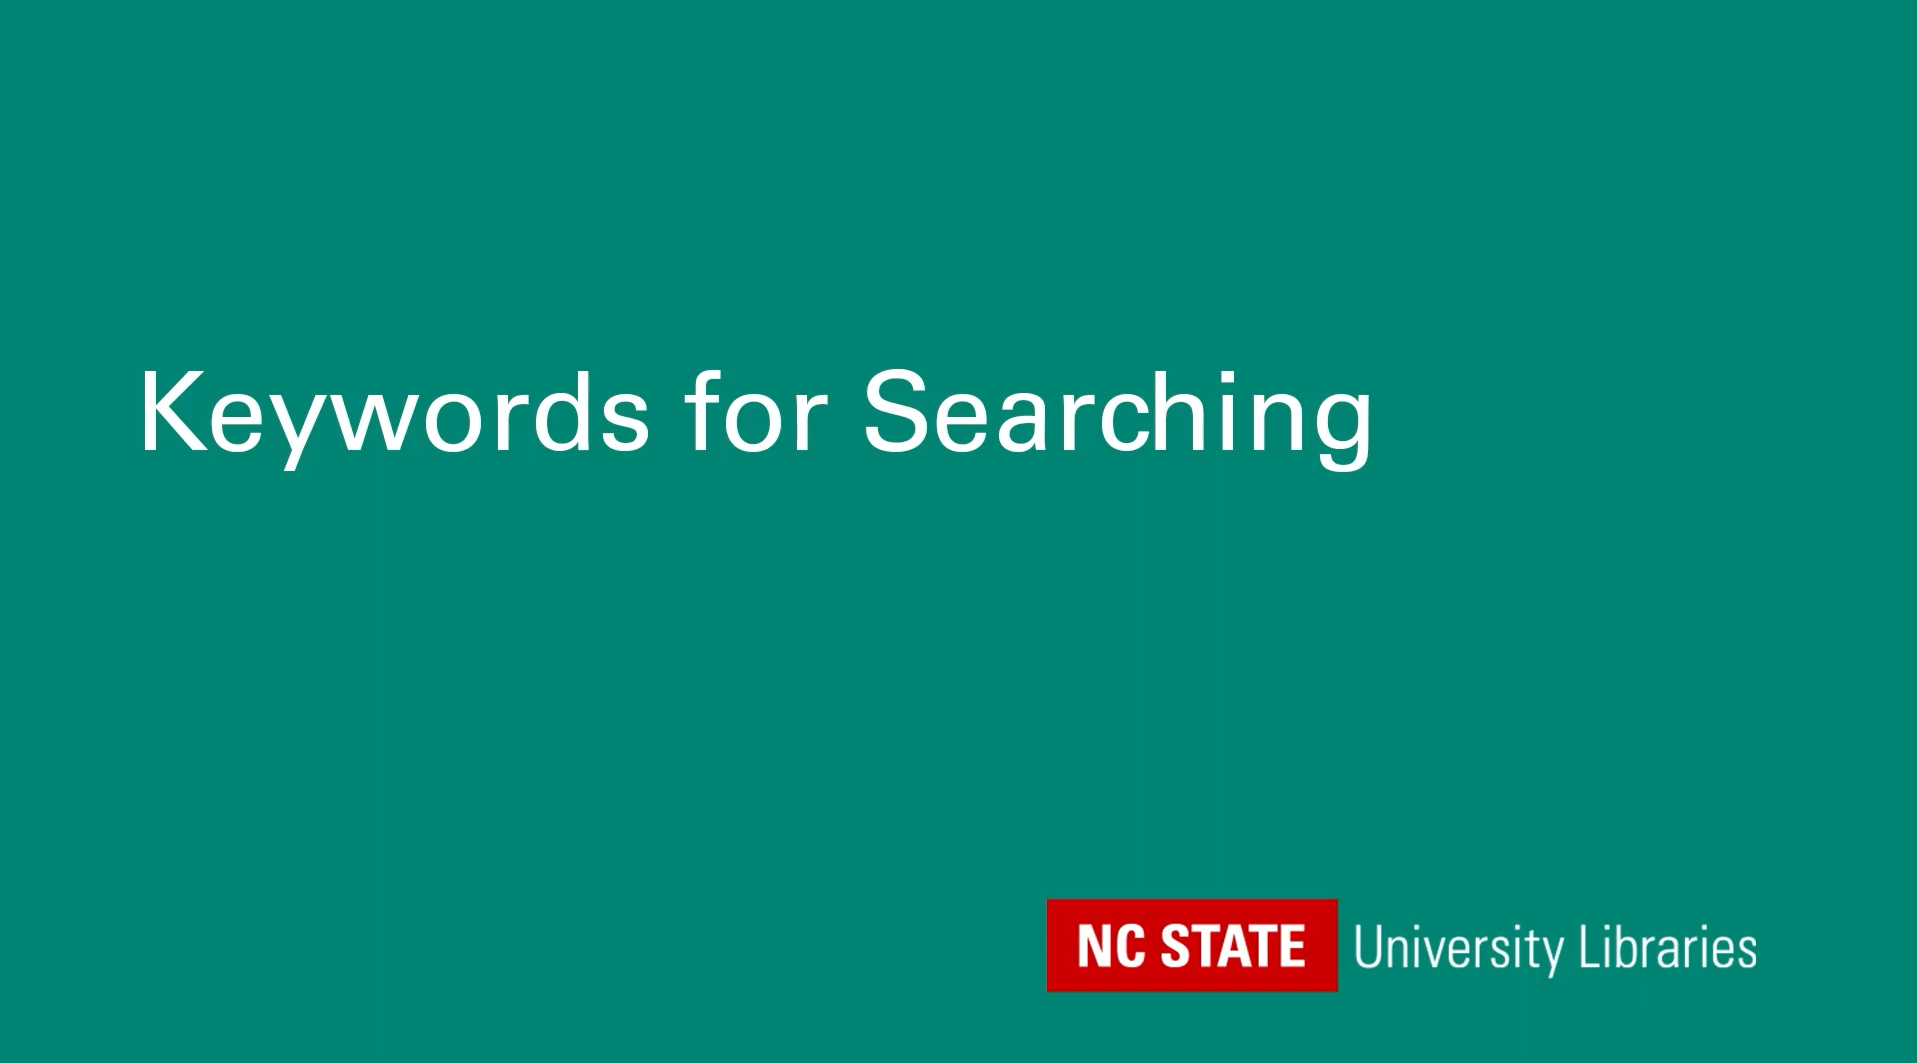 Keywords for Searching